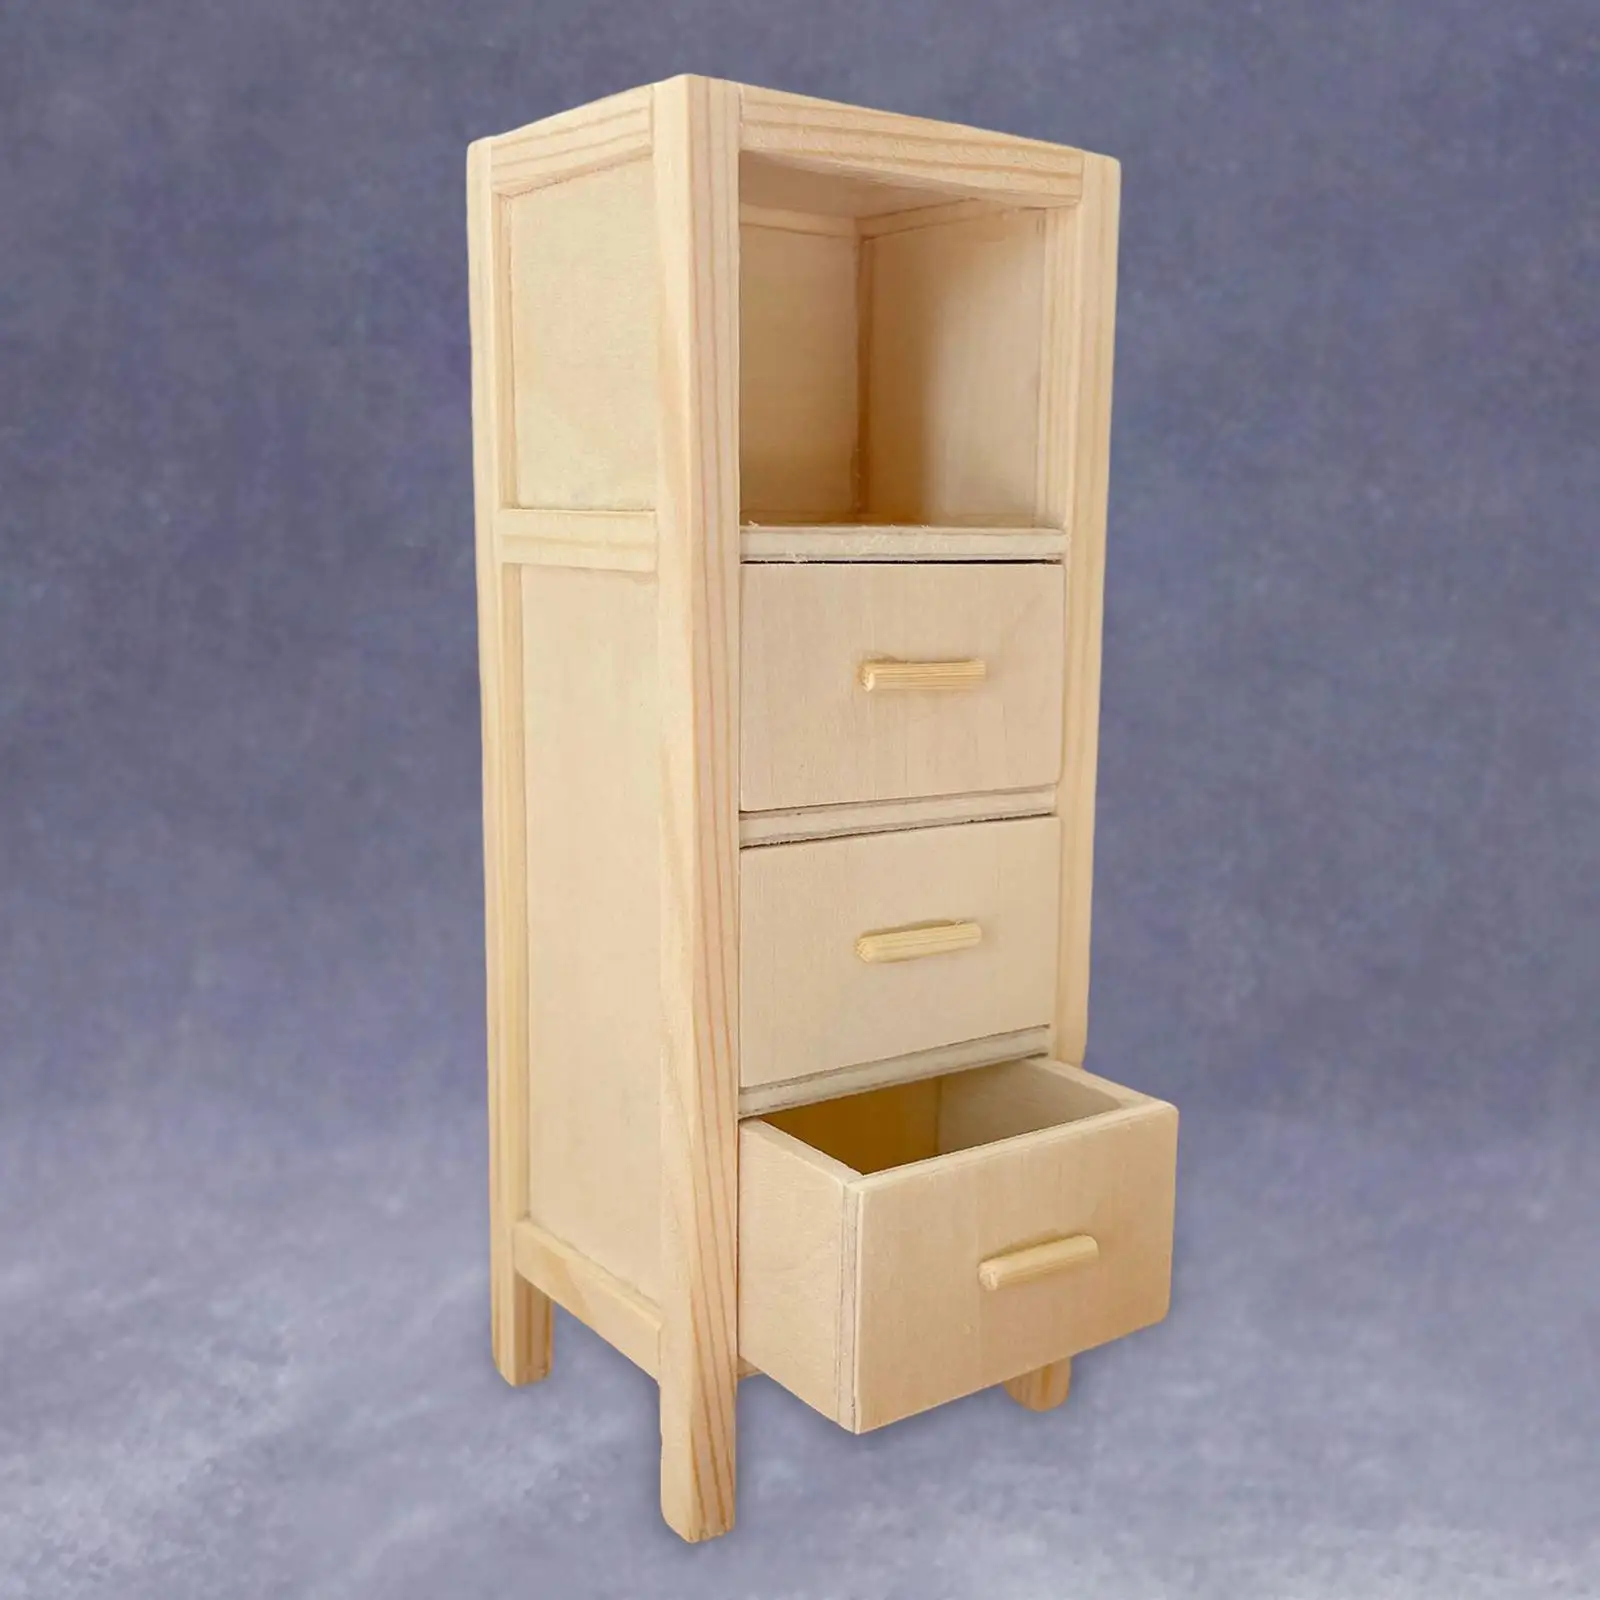 1/12 Scale Dollhouse Furniture Display Cabinet Handcraft DIY Model for Accessory